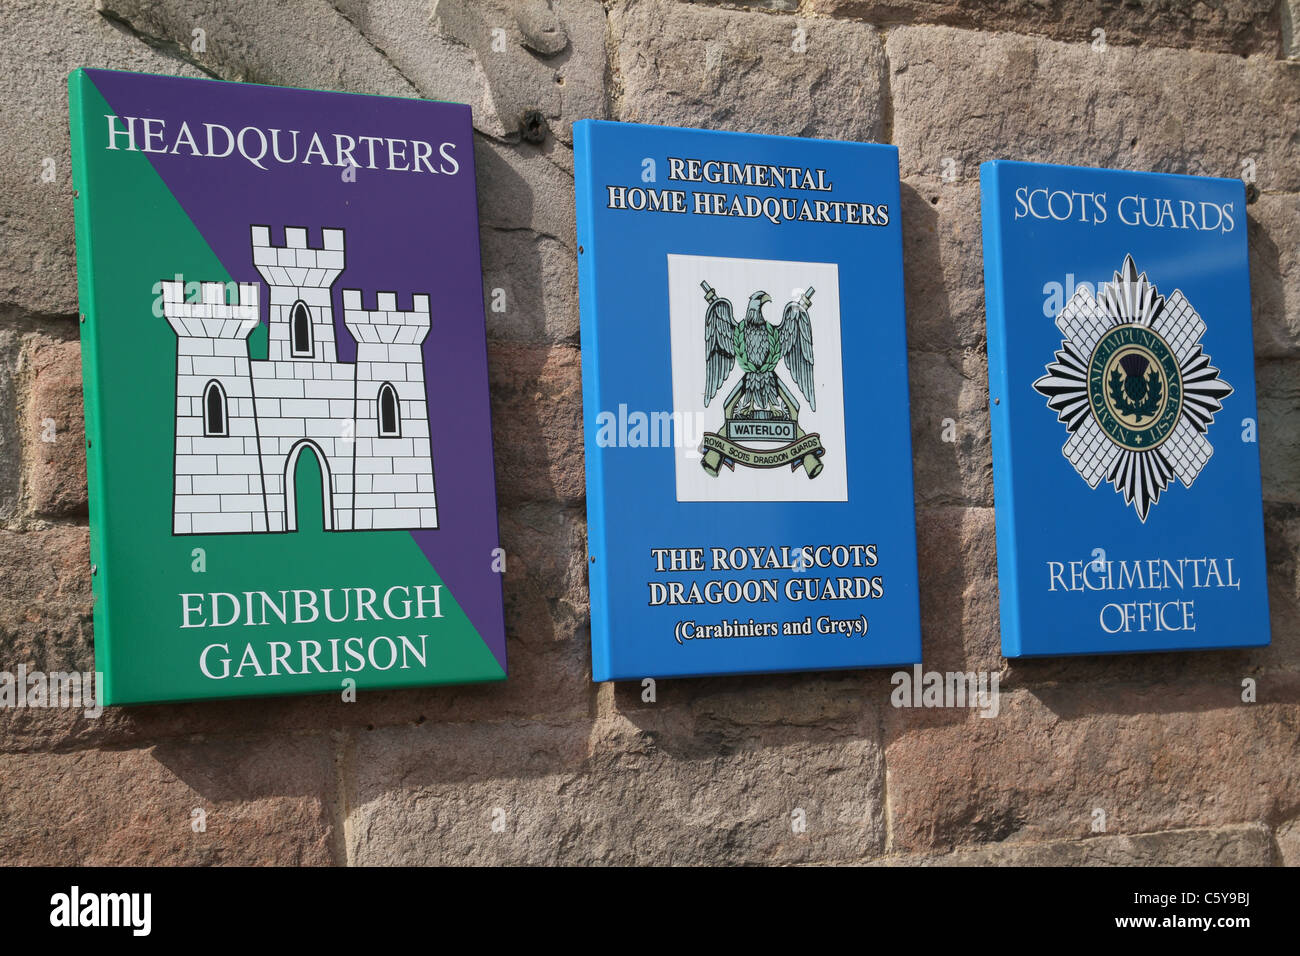 Plaques with names of different regiments and garrisons at Edinburgh Castle, Scotland Stock Photo